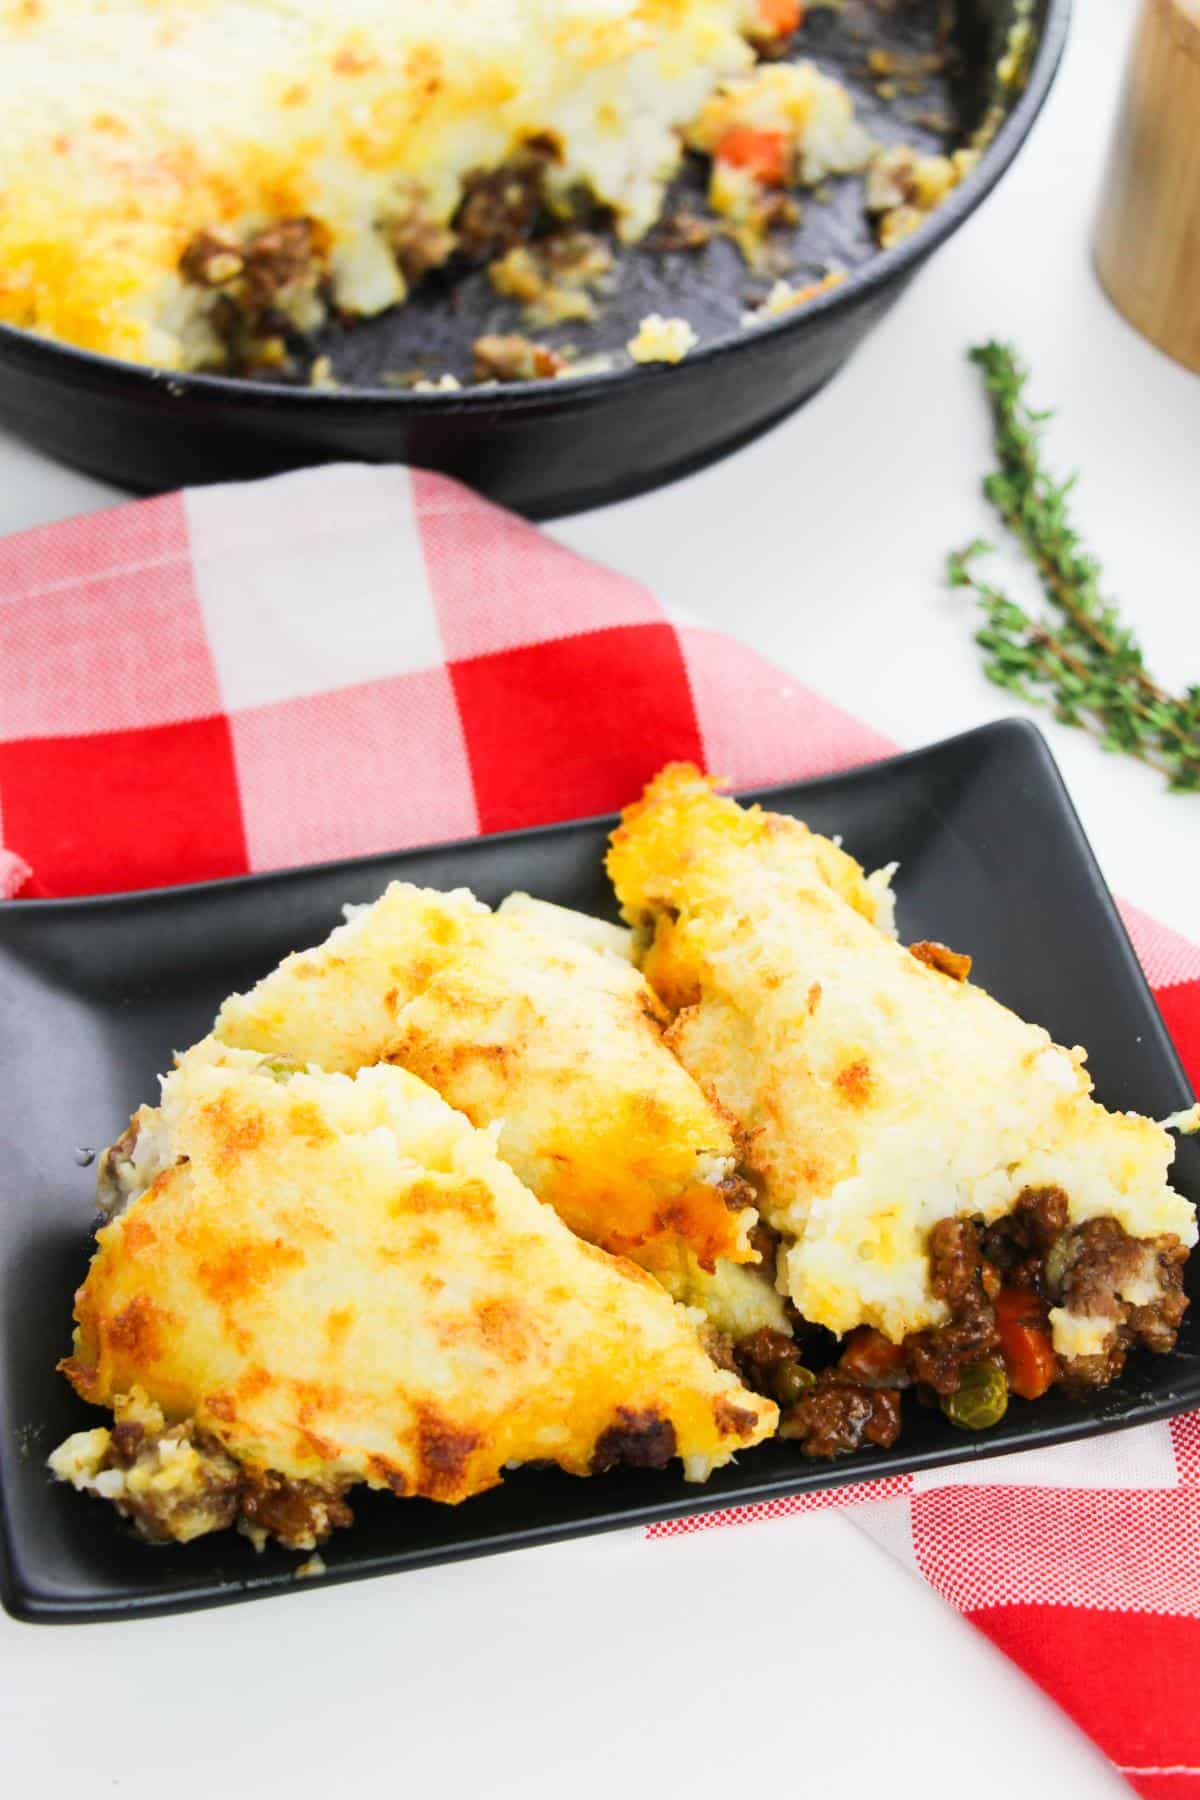 A plate of Cast Iron Shepherd's Pie on a table with a red and white checkered table cloth.